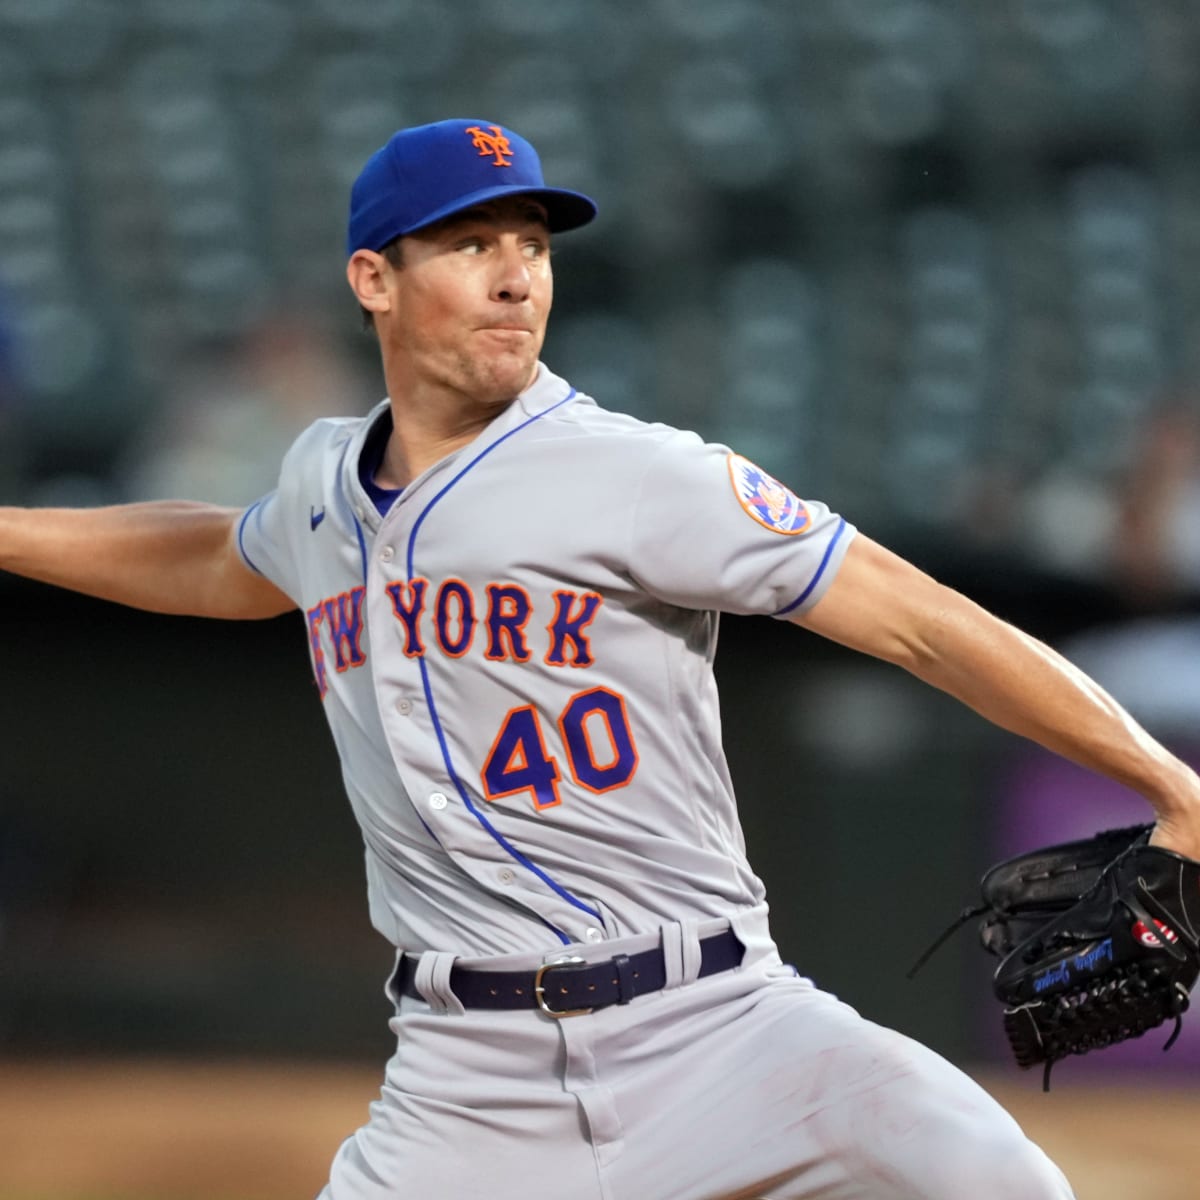 DeGrom Rejects Mets' Contract Offer, So They Gave It to Him Anyway - WSJ